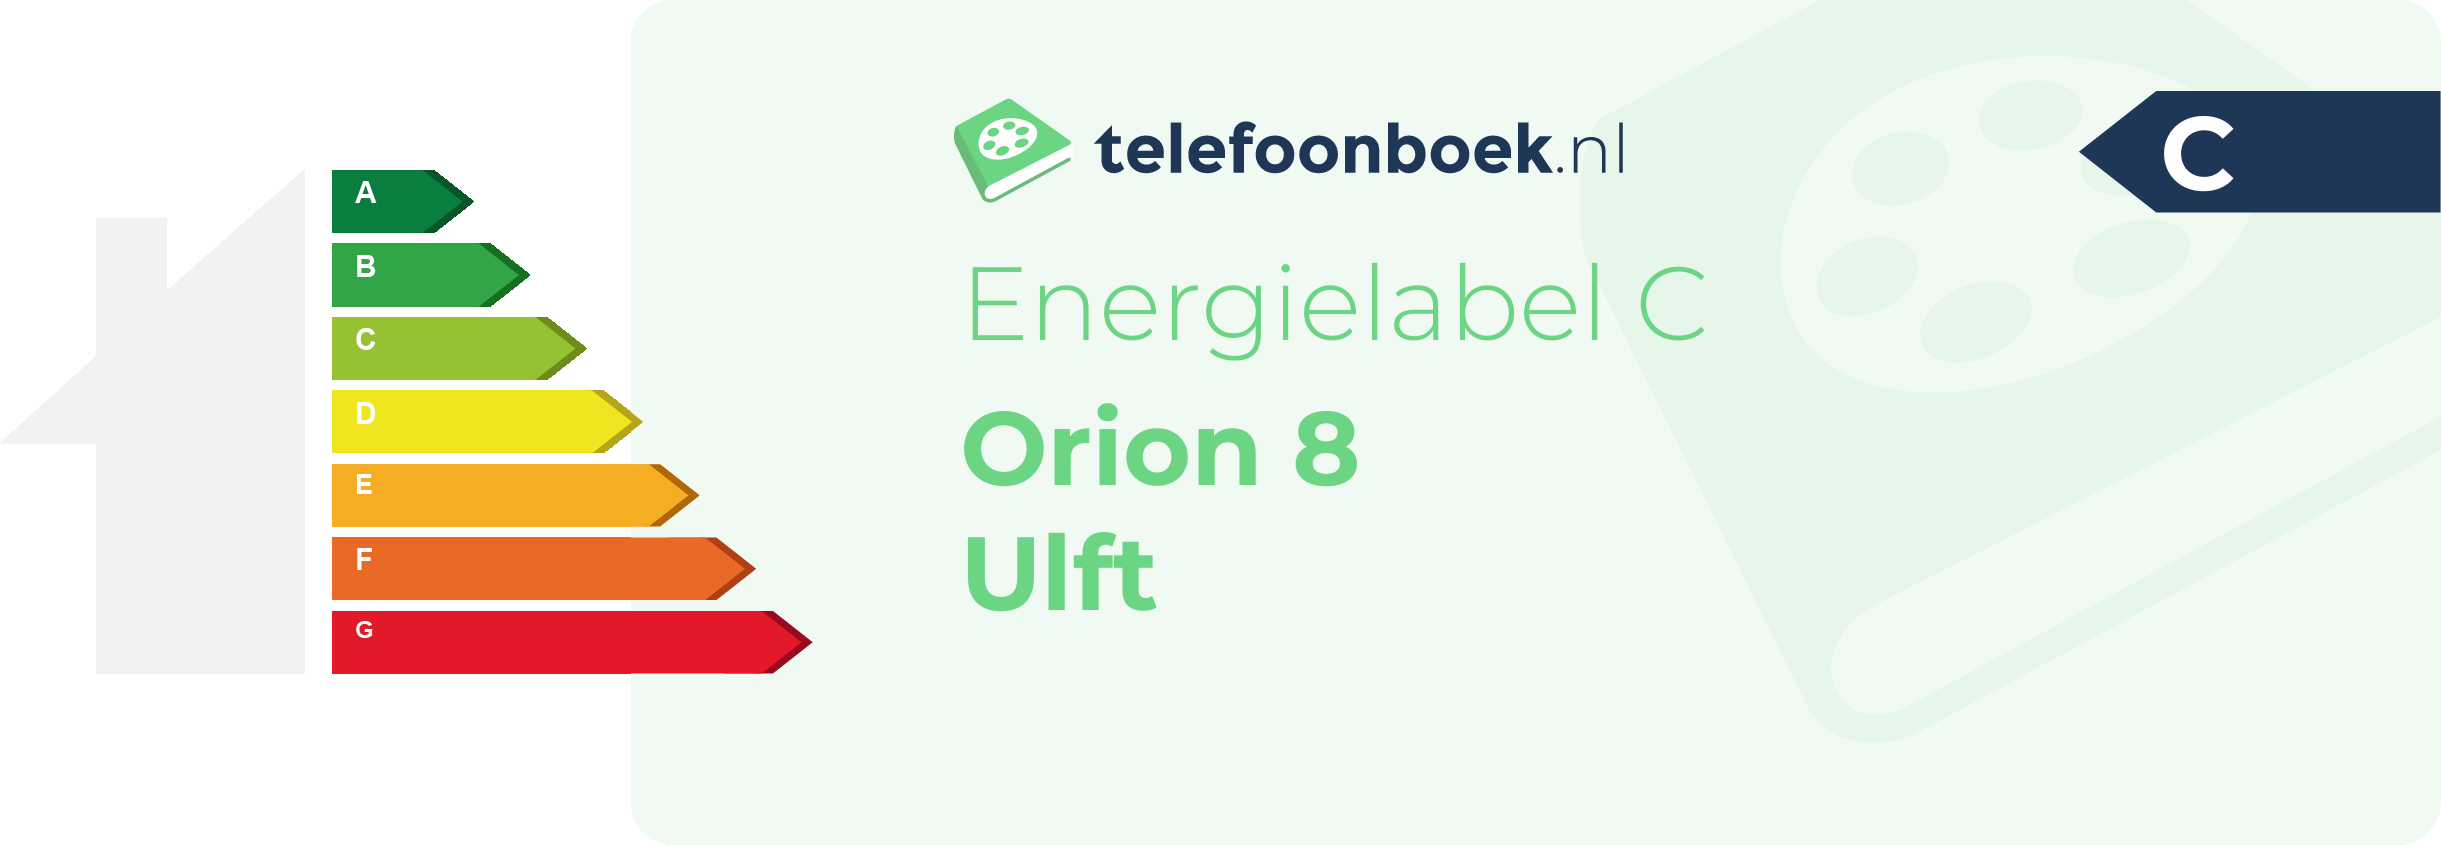 Energielabel Orion 8 Ulft